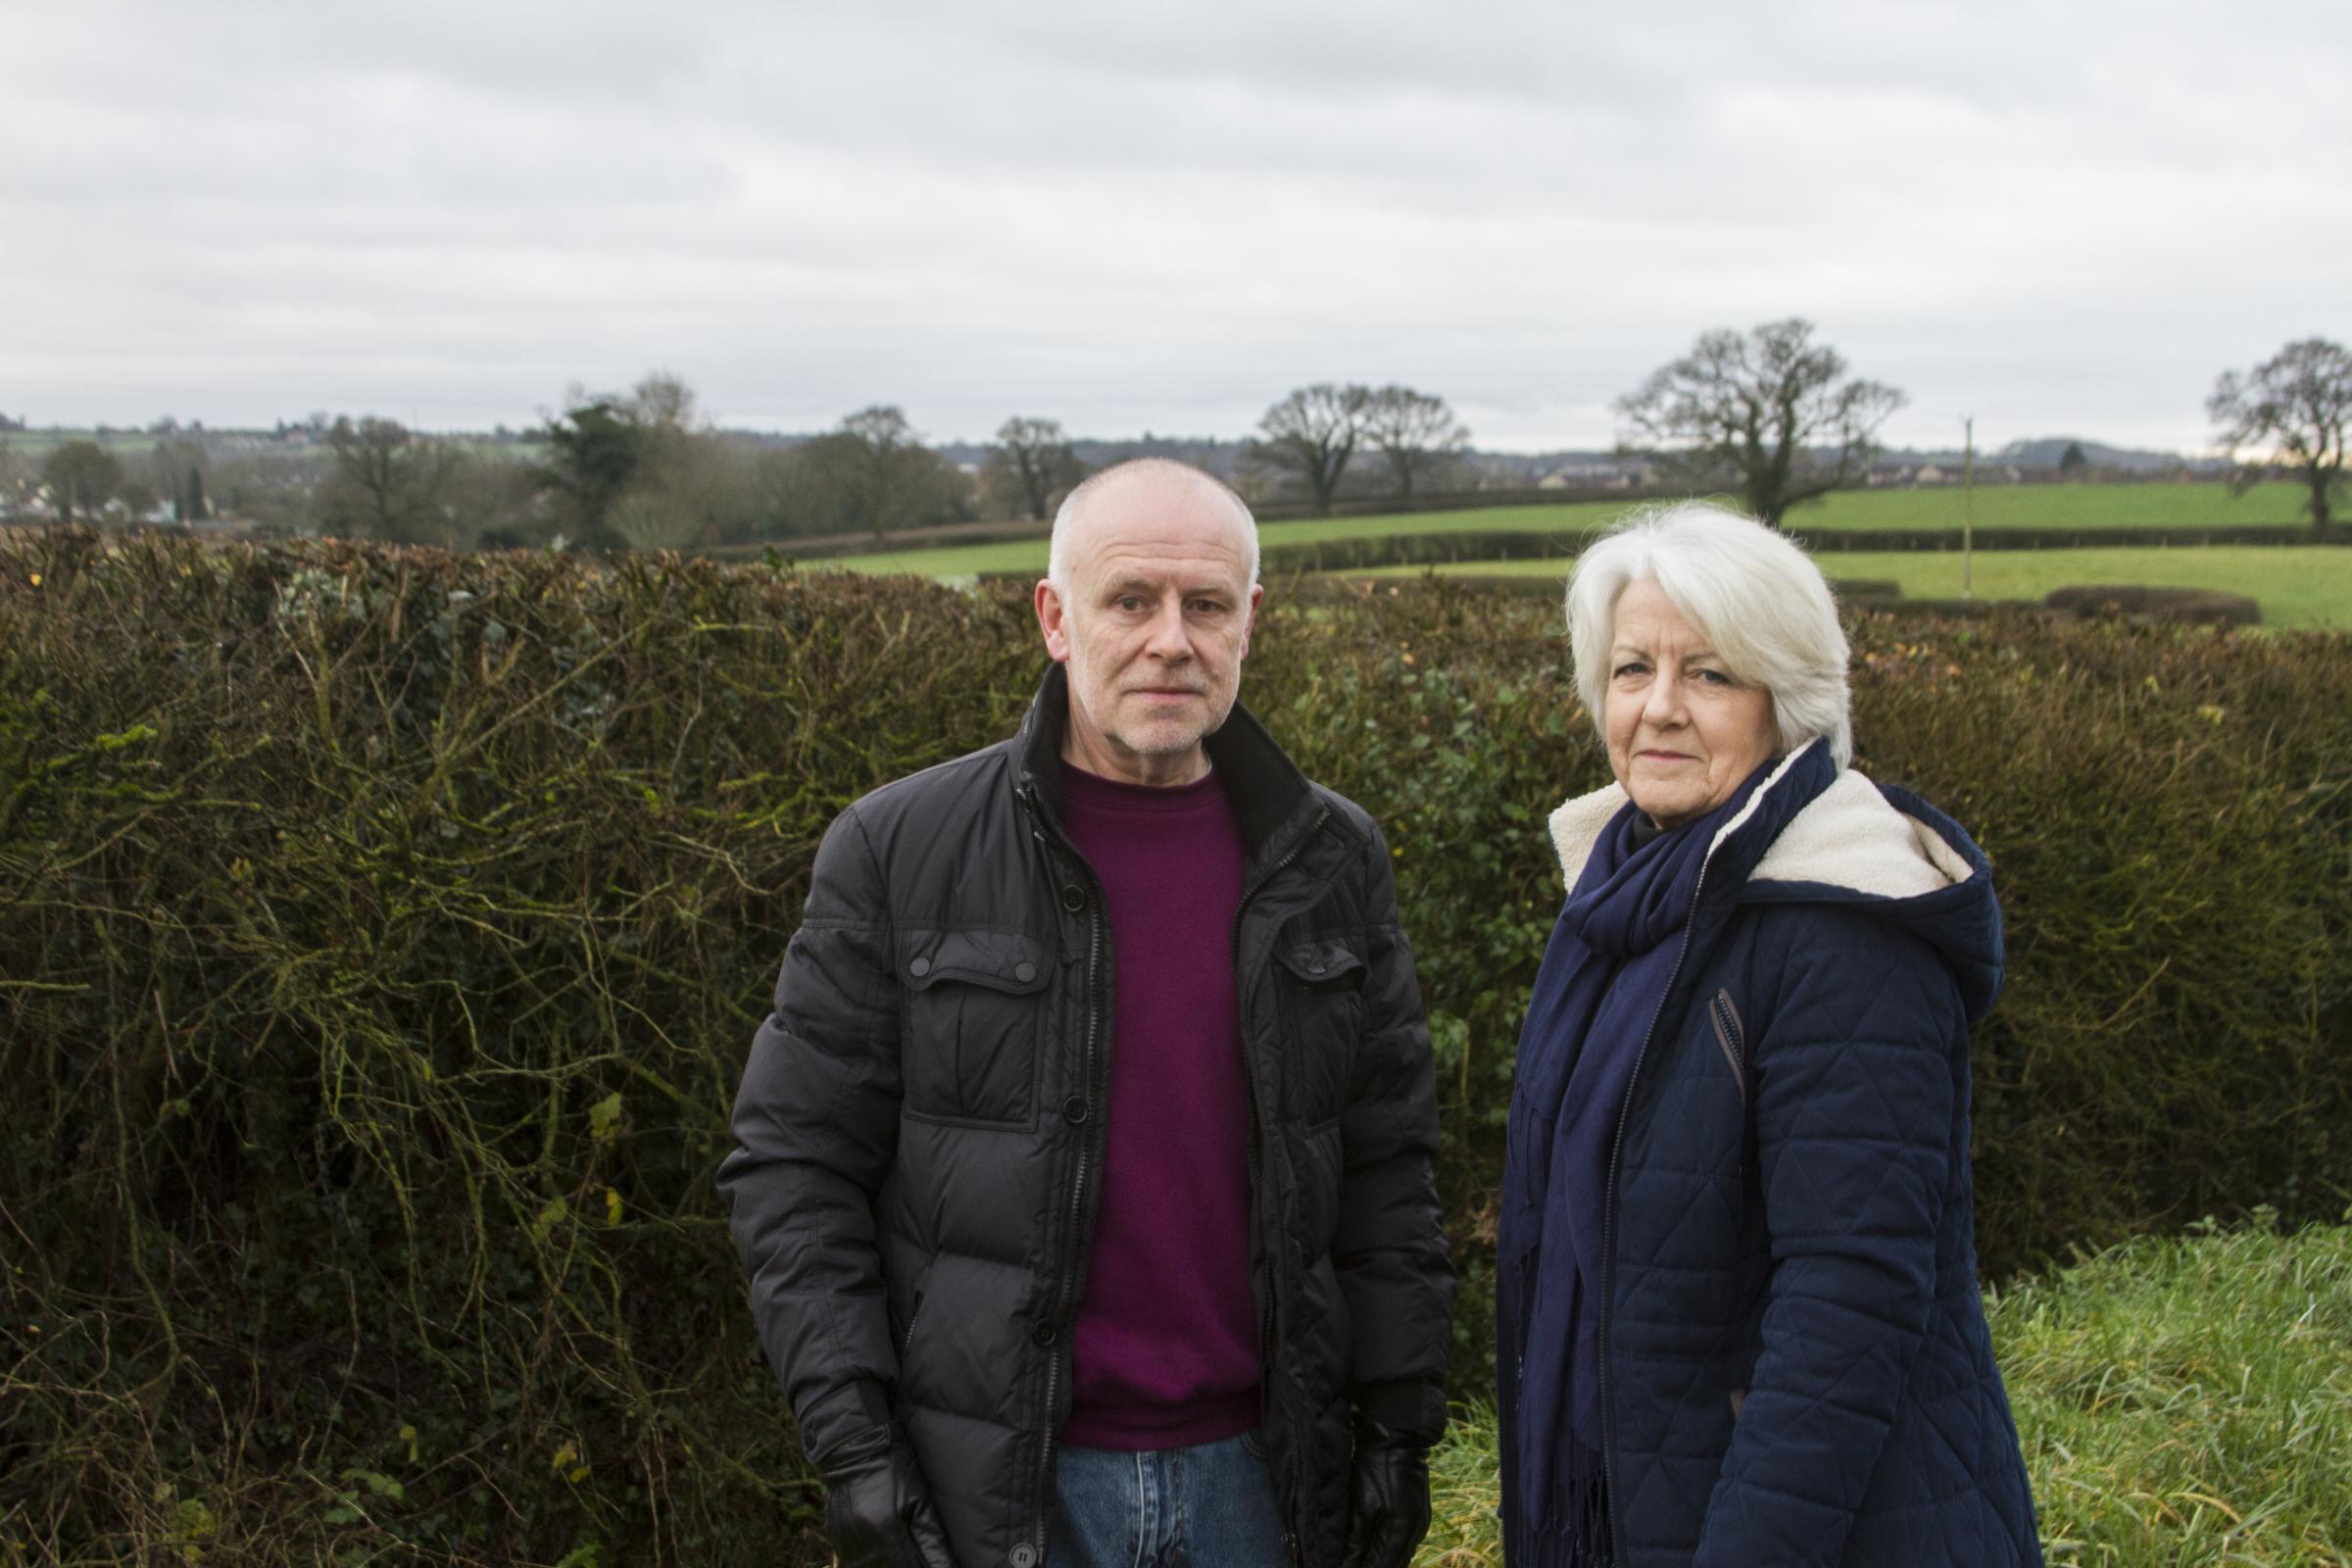 'We gave up and moved out of Thornbury' - residents leave as town faces hundreds of new houses - South Cotswolds Gazette